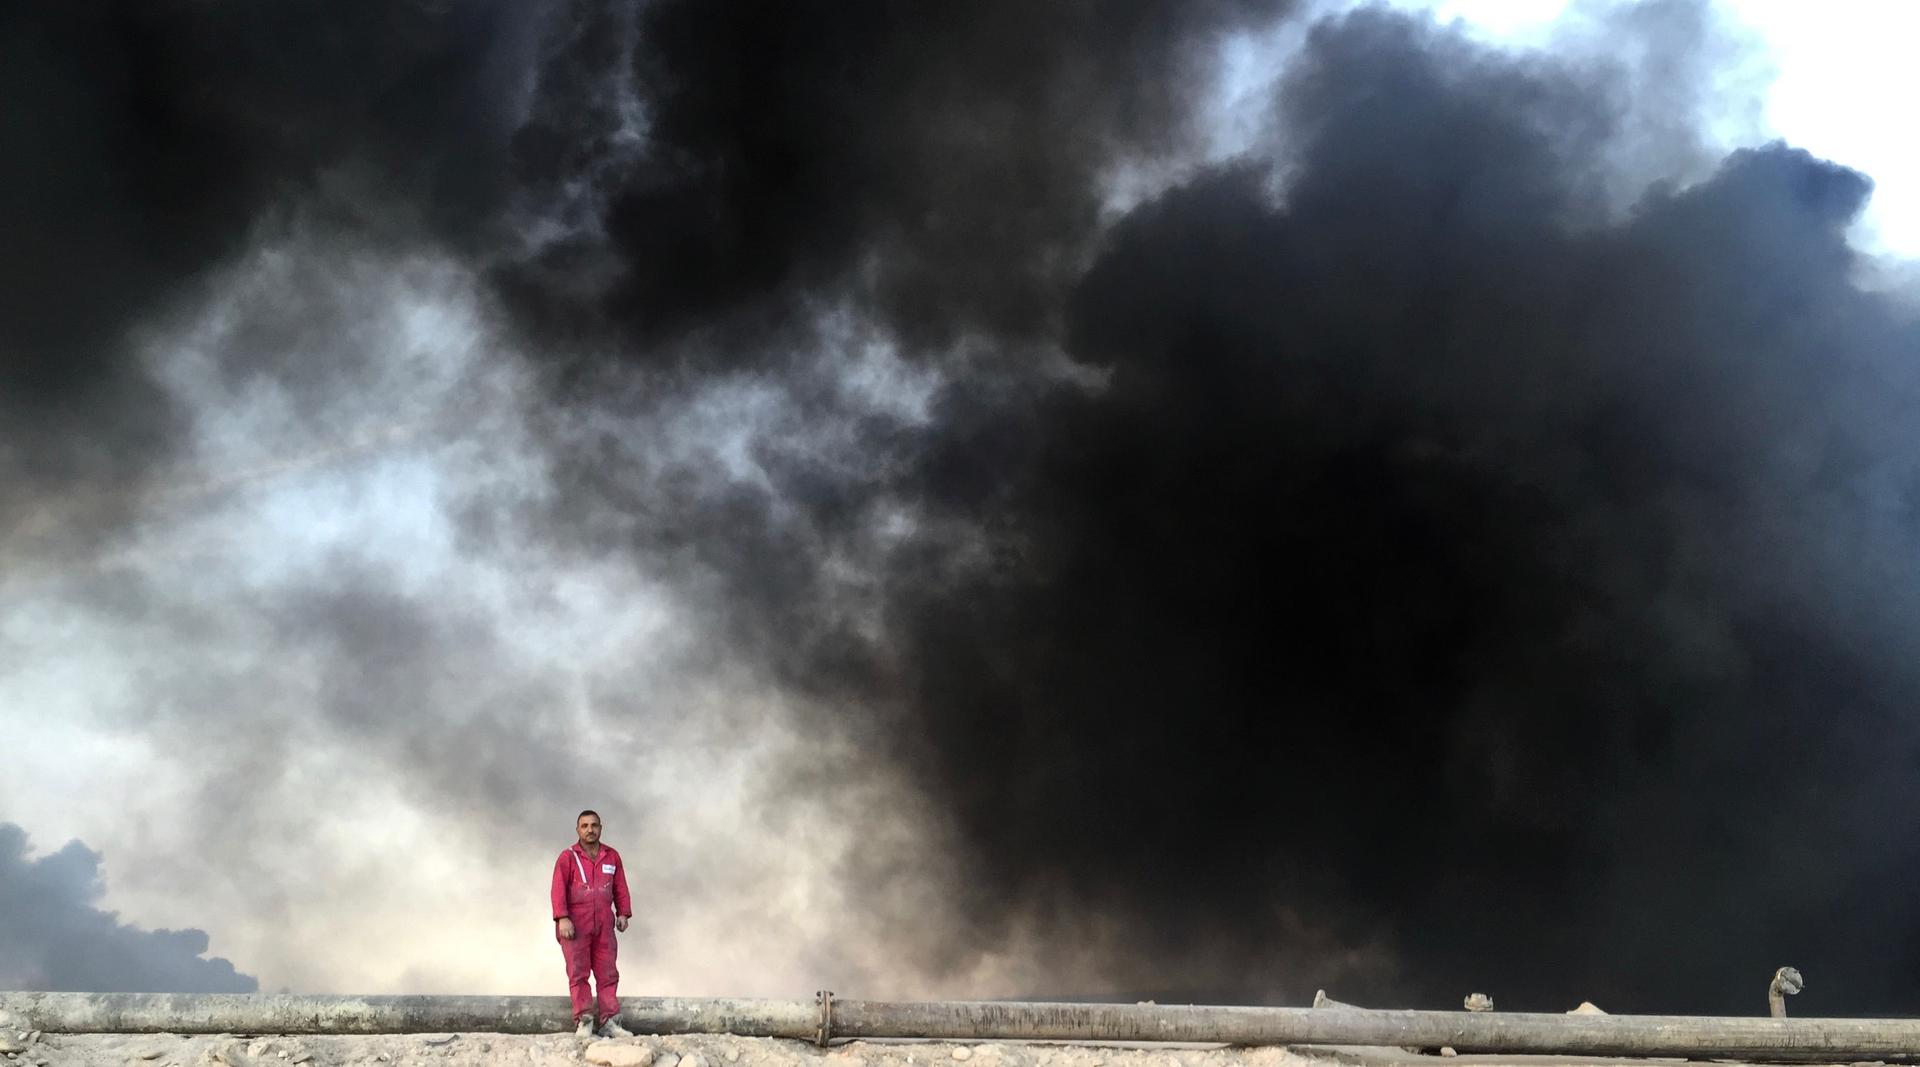 Iraqi firefighter at oil well fire in Qayyarah